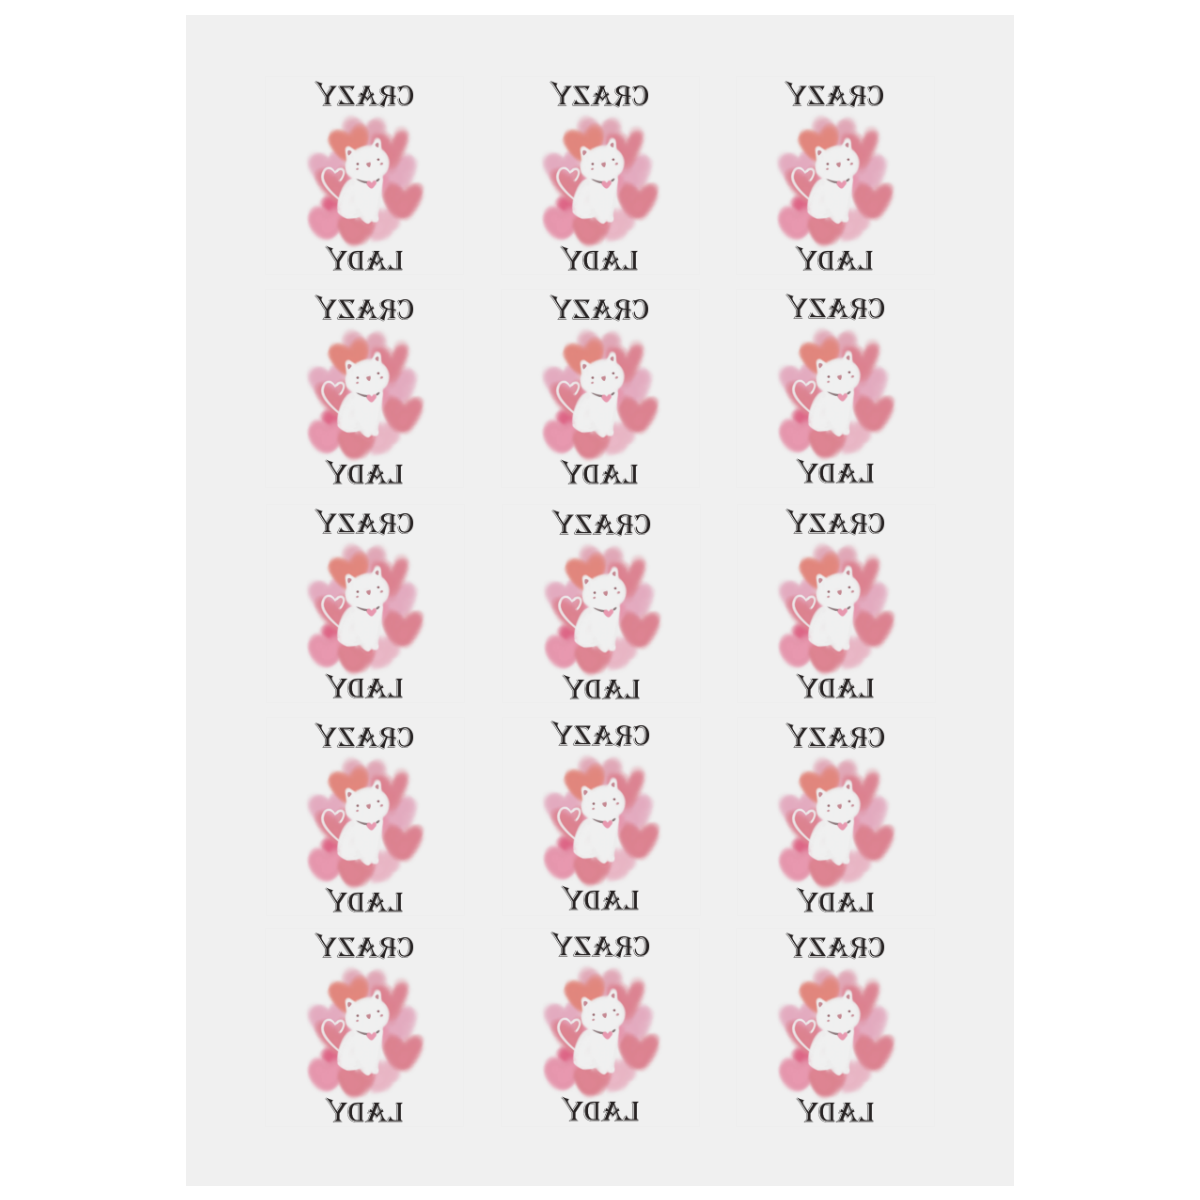 Cat lady Personalized Temporary Tattoo (15 Pieces)